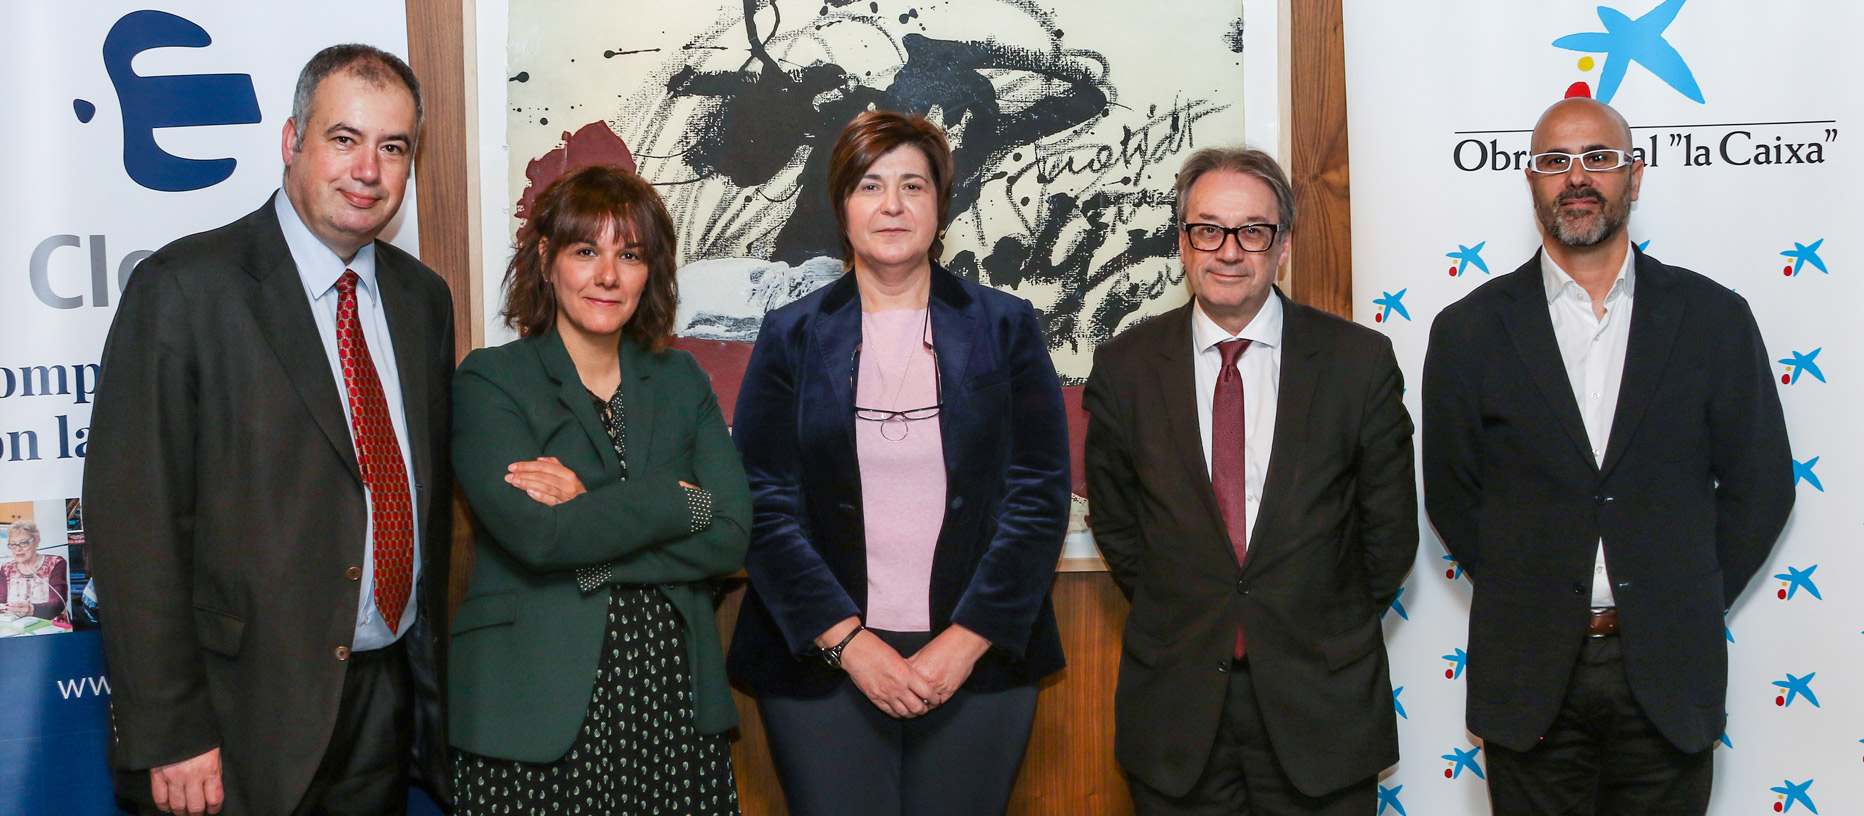 Clece joins the “la Caixa” Incorpora Program to encourage the employment of people at risk of social exclusion